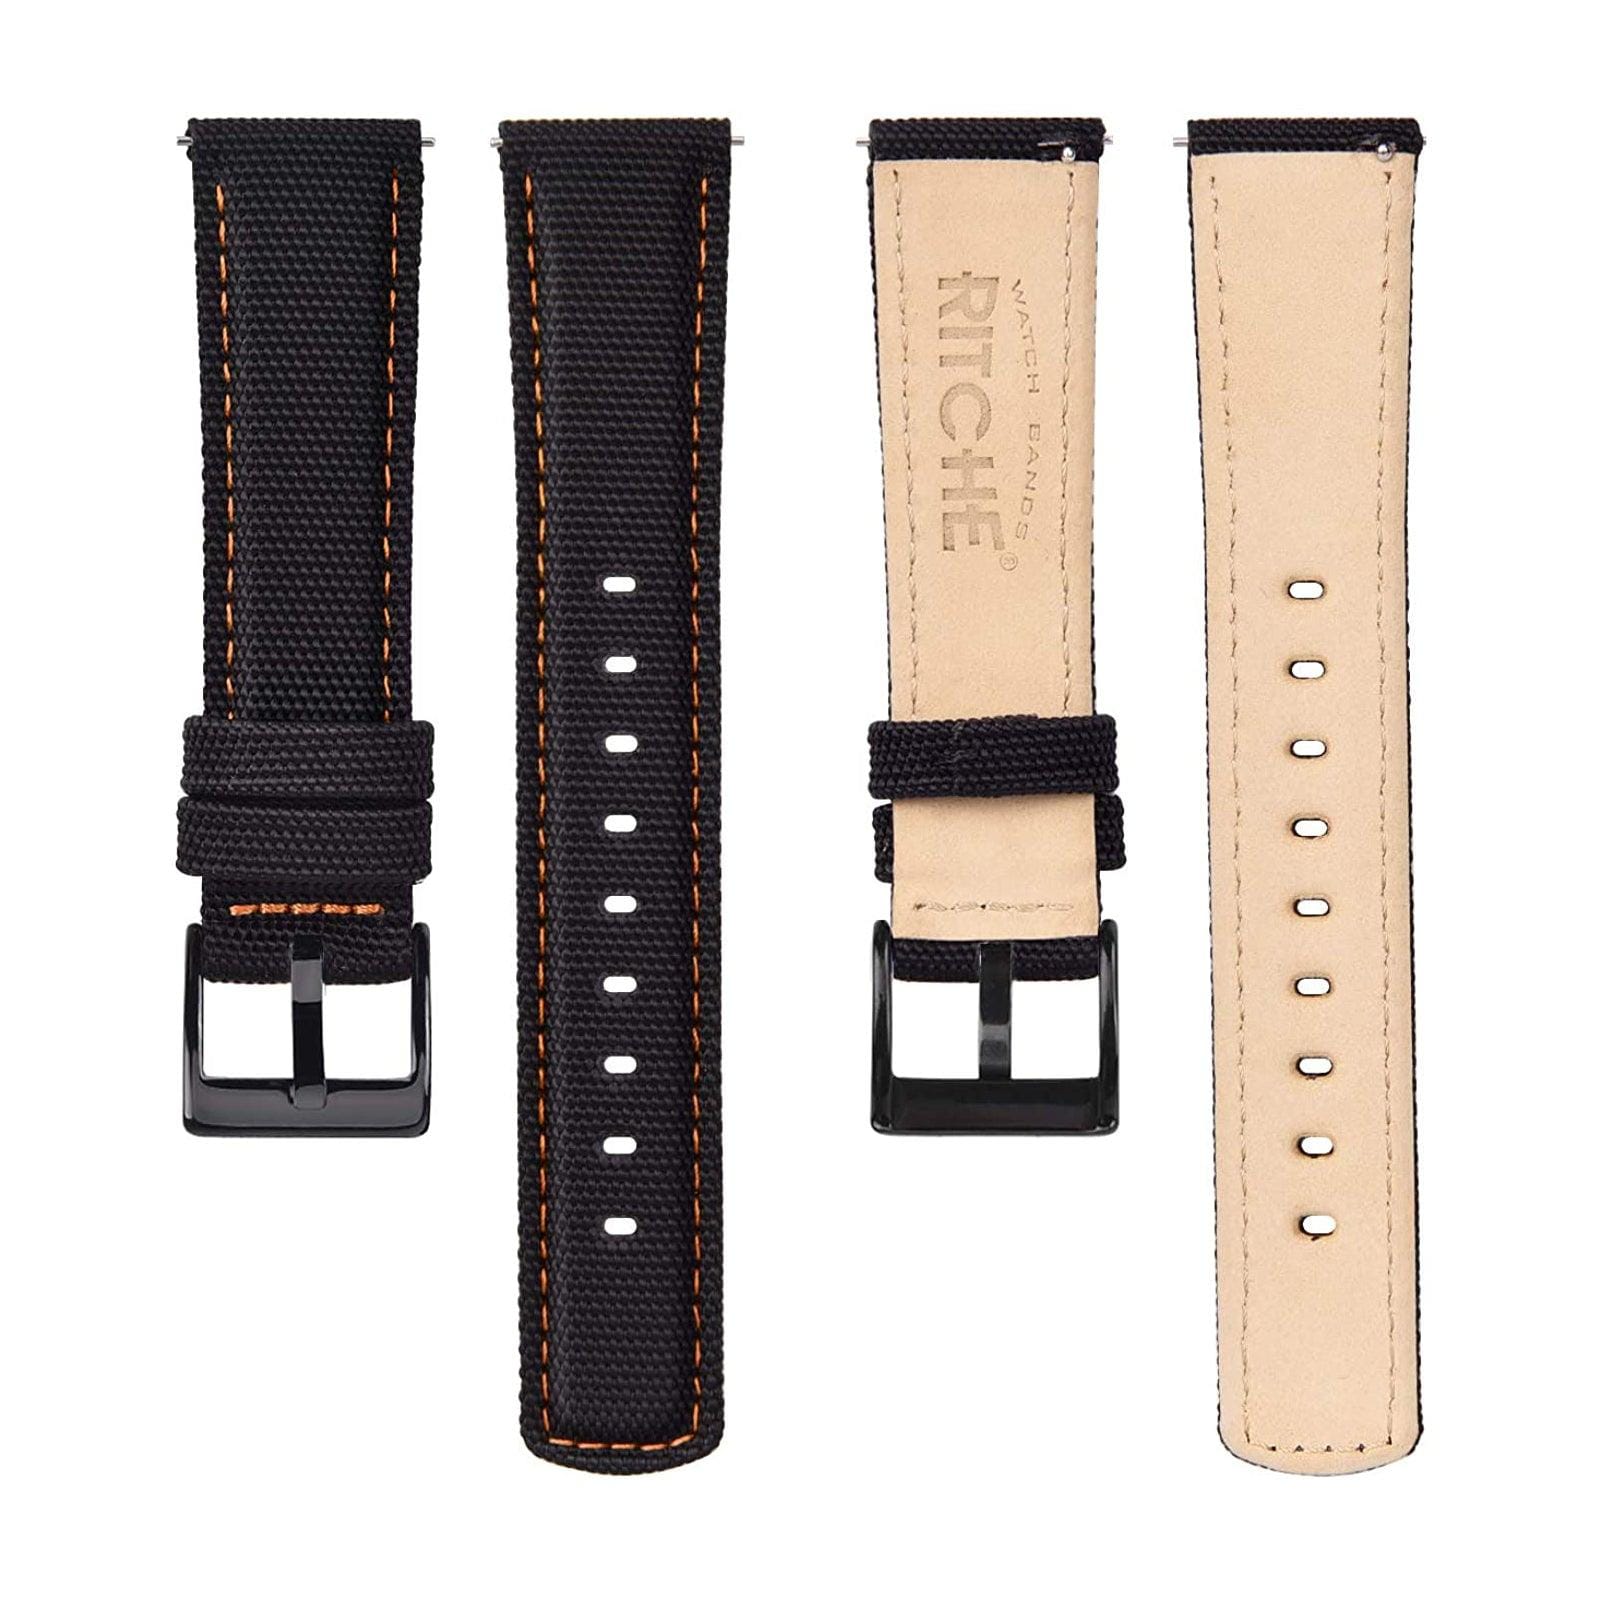 Sailcloth water-resistant watch strap 17-24 mm. Black with red stitching.